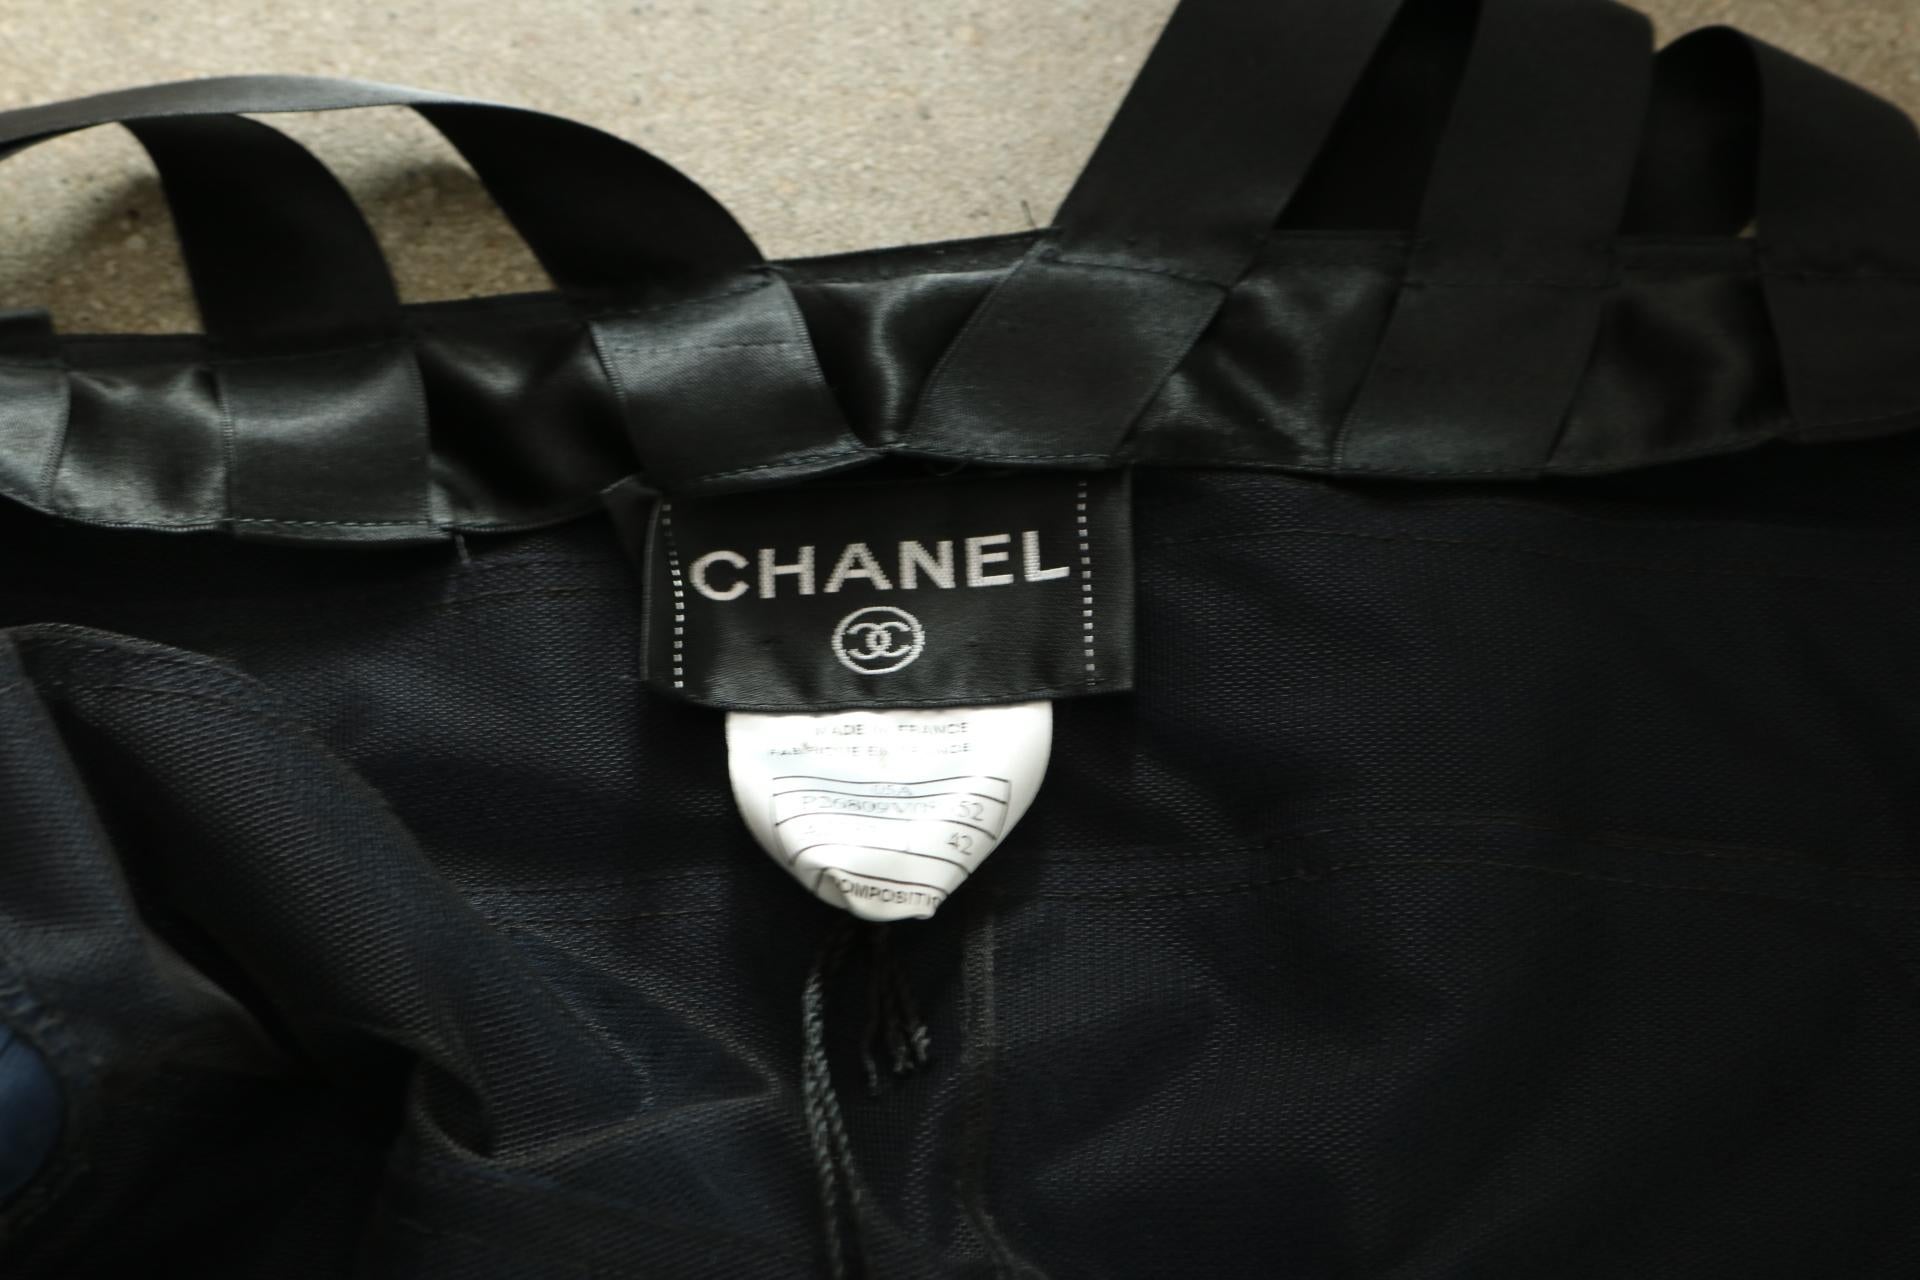 Chanel Runway Ribbon Cocktail Dress  In Excellent Condition For Sale In Thousand Oaks, CA